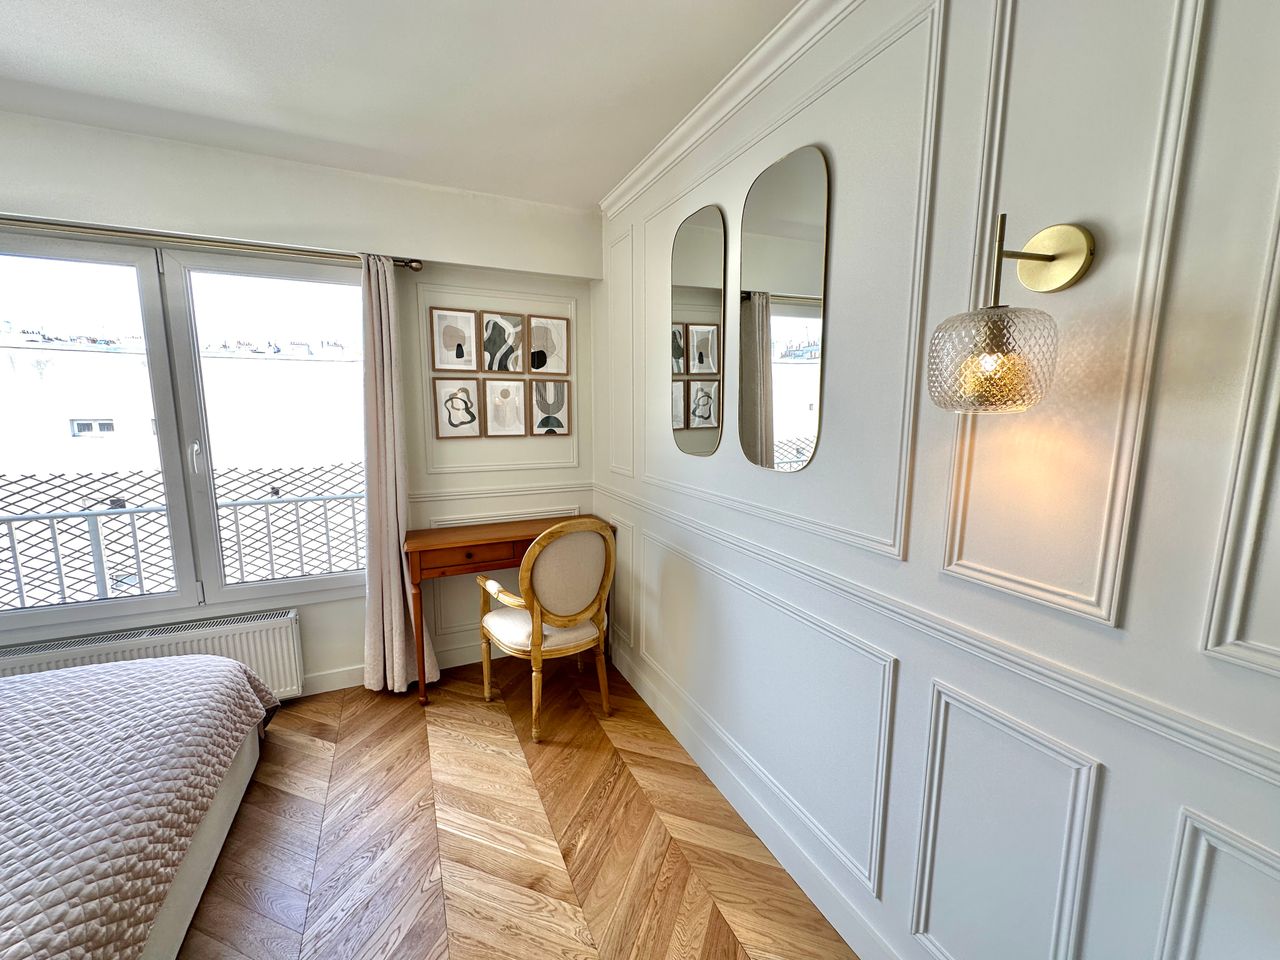 Charming appartement with stunning view of Sacré-Coeur